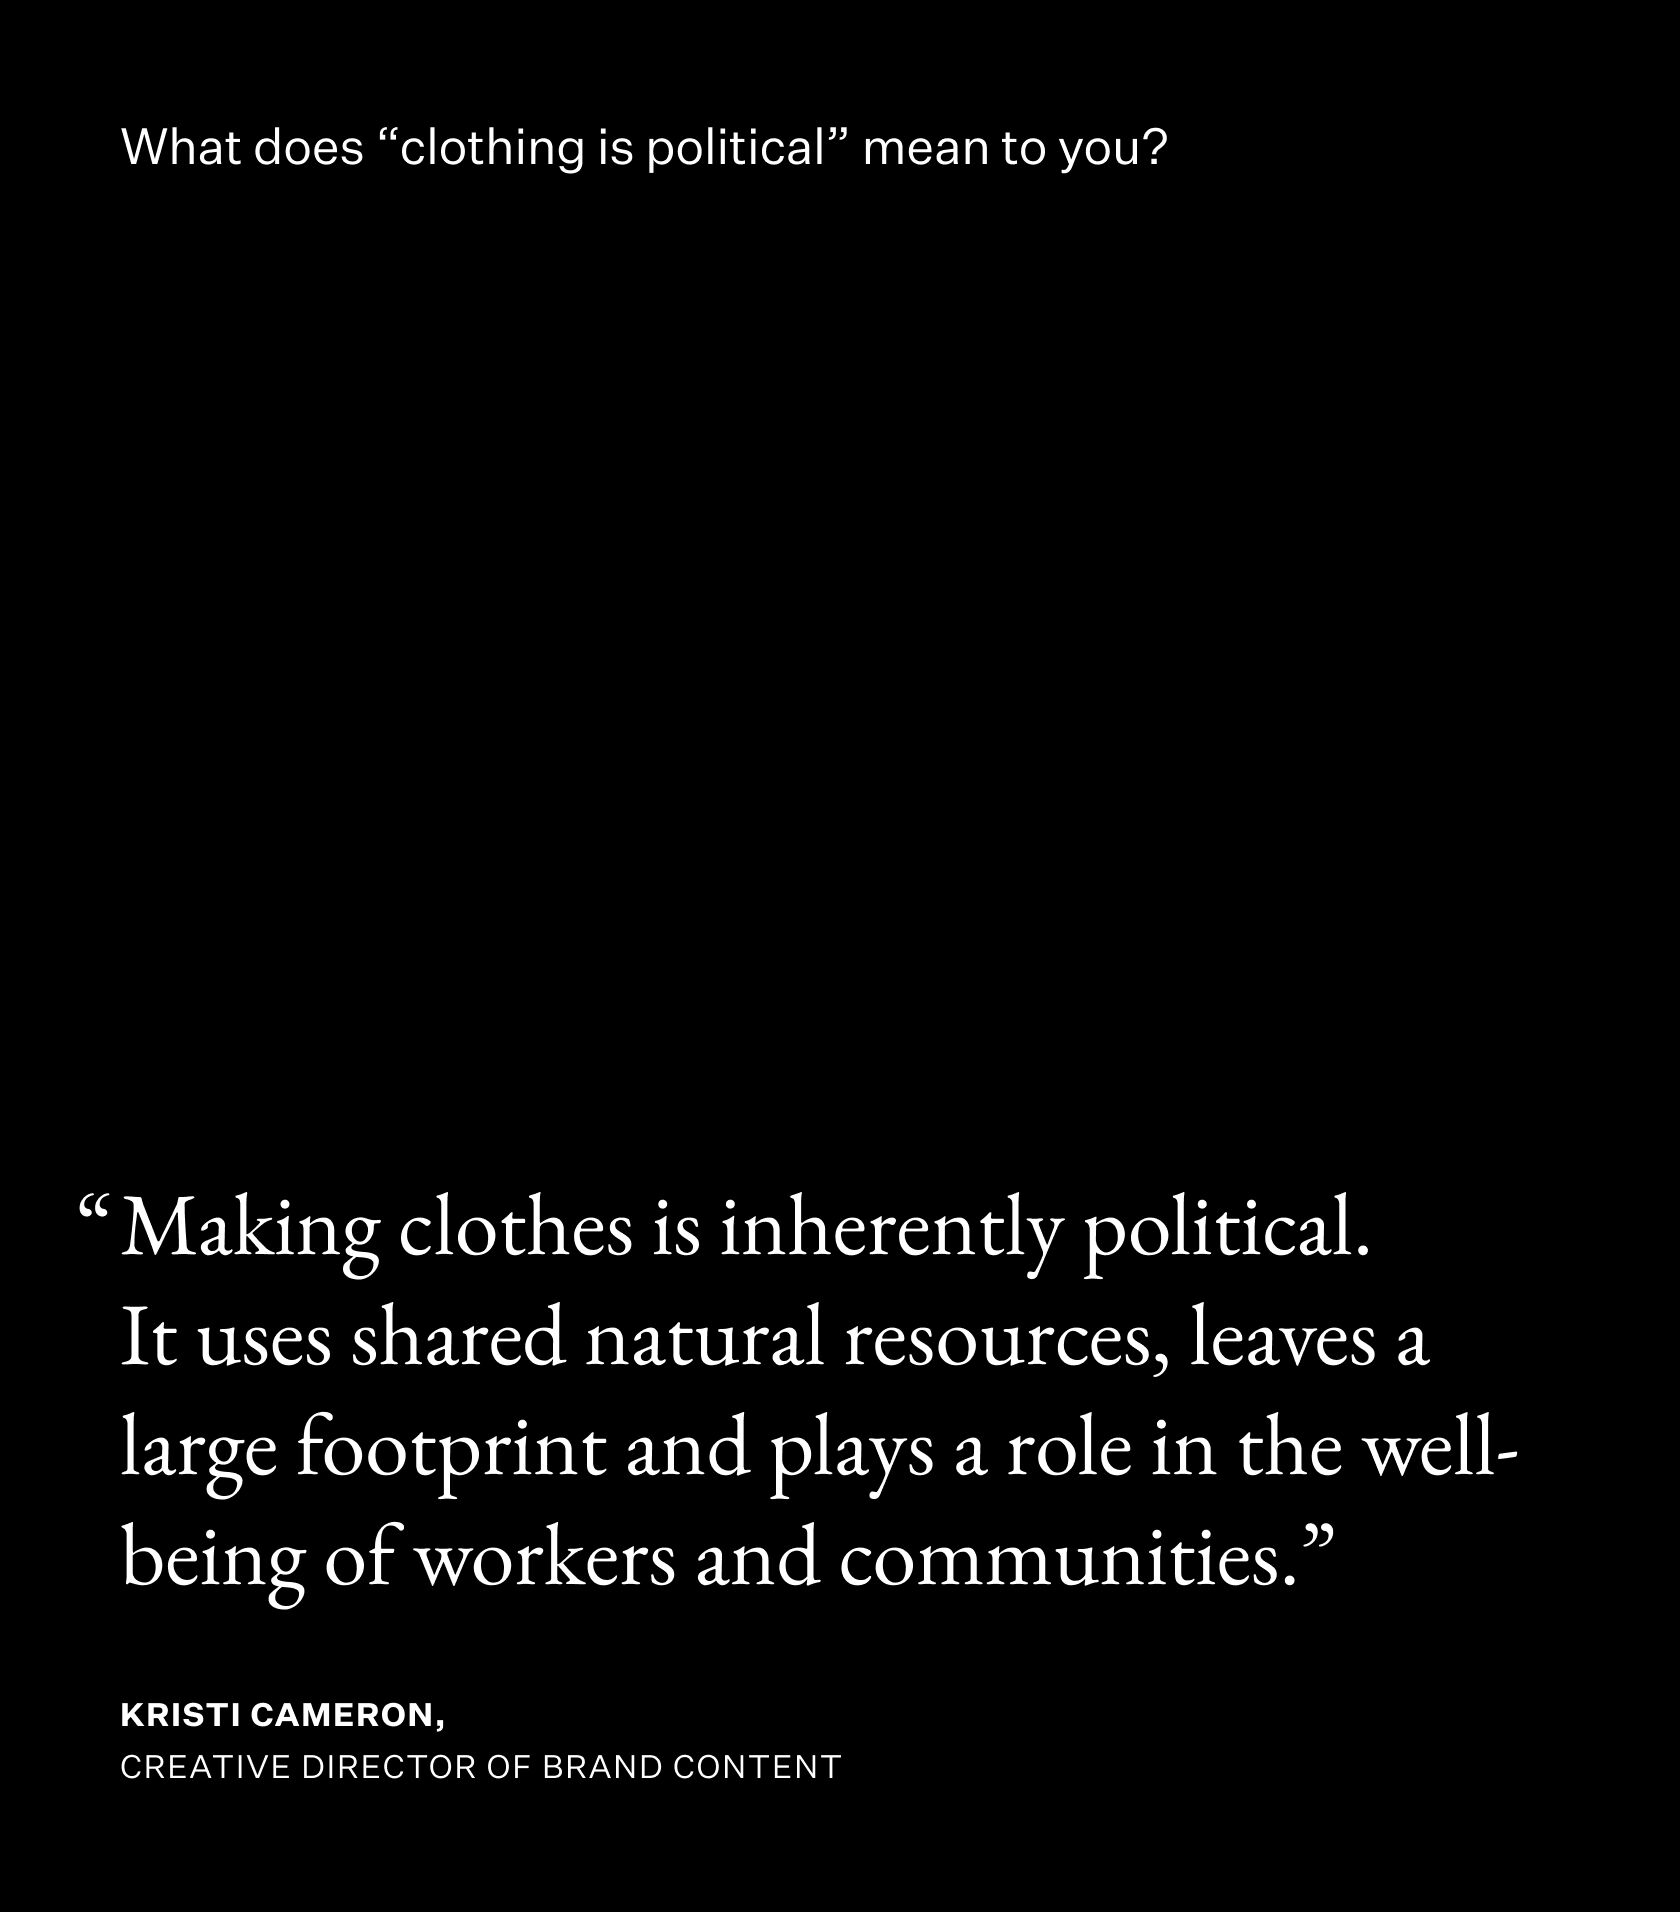 Making clothes is inherently political infographic.